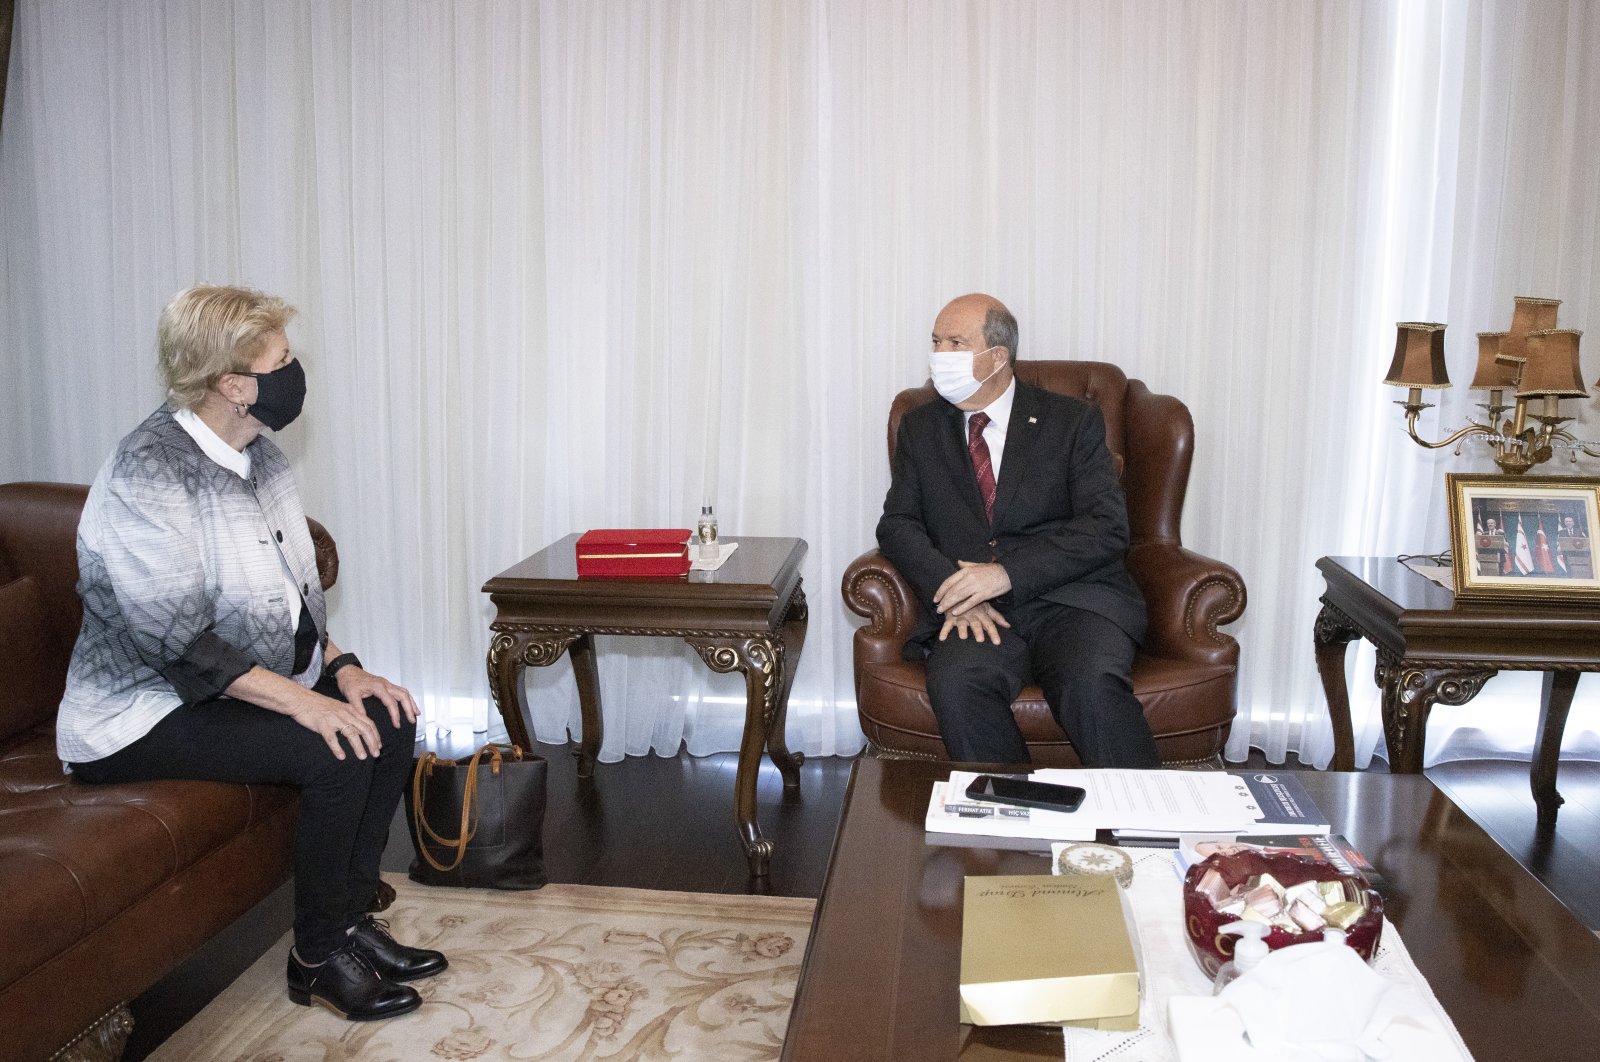 Jane Holl Lute (L), the United Nations special envoy on the Cyprus dispute, and Turkish Republic of Northern Cyprus (TRNC) President Ersin Tatar talk in Lefkoşa (Nicosia), TRNC, June 22, 2021. (AA Photo)